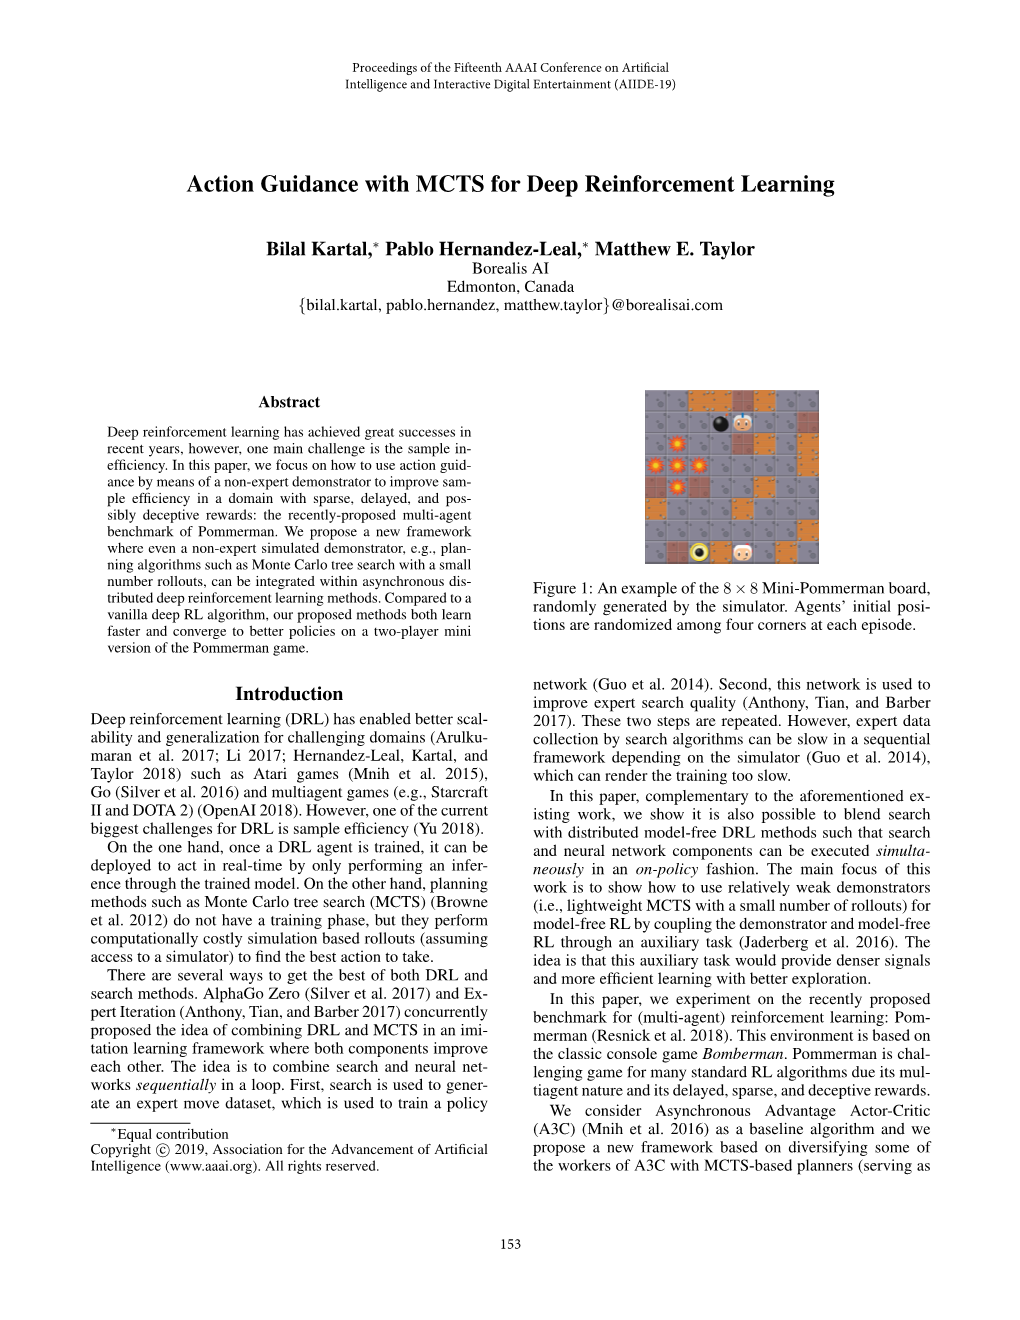 Action Guidance with MCTS for Deep Reinforcement Learning